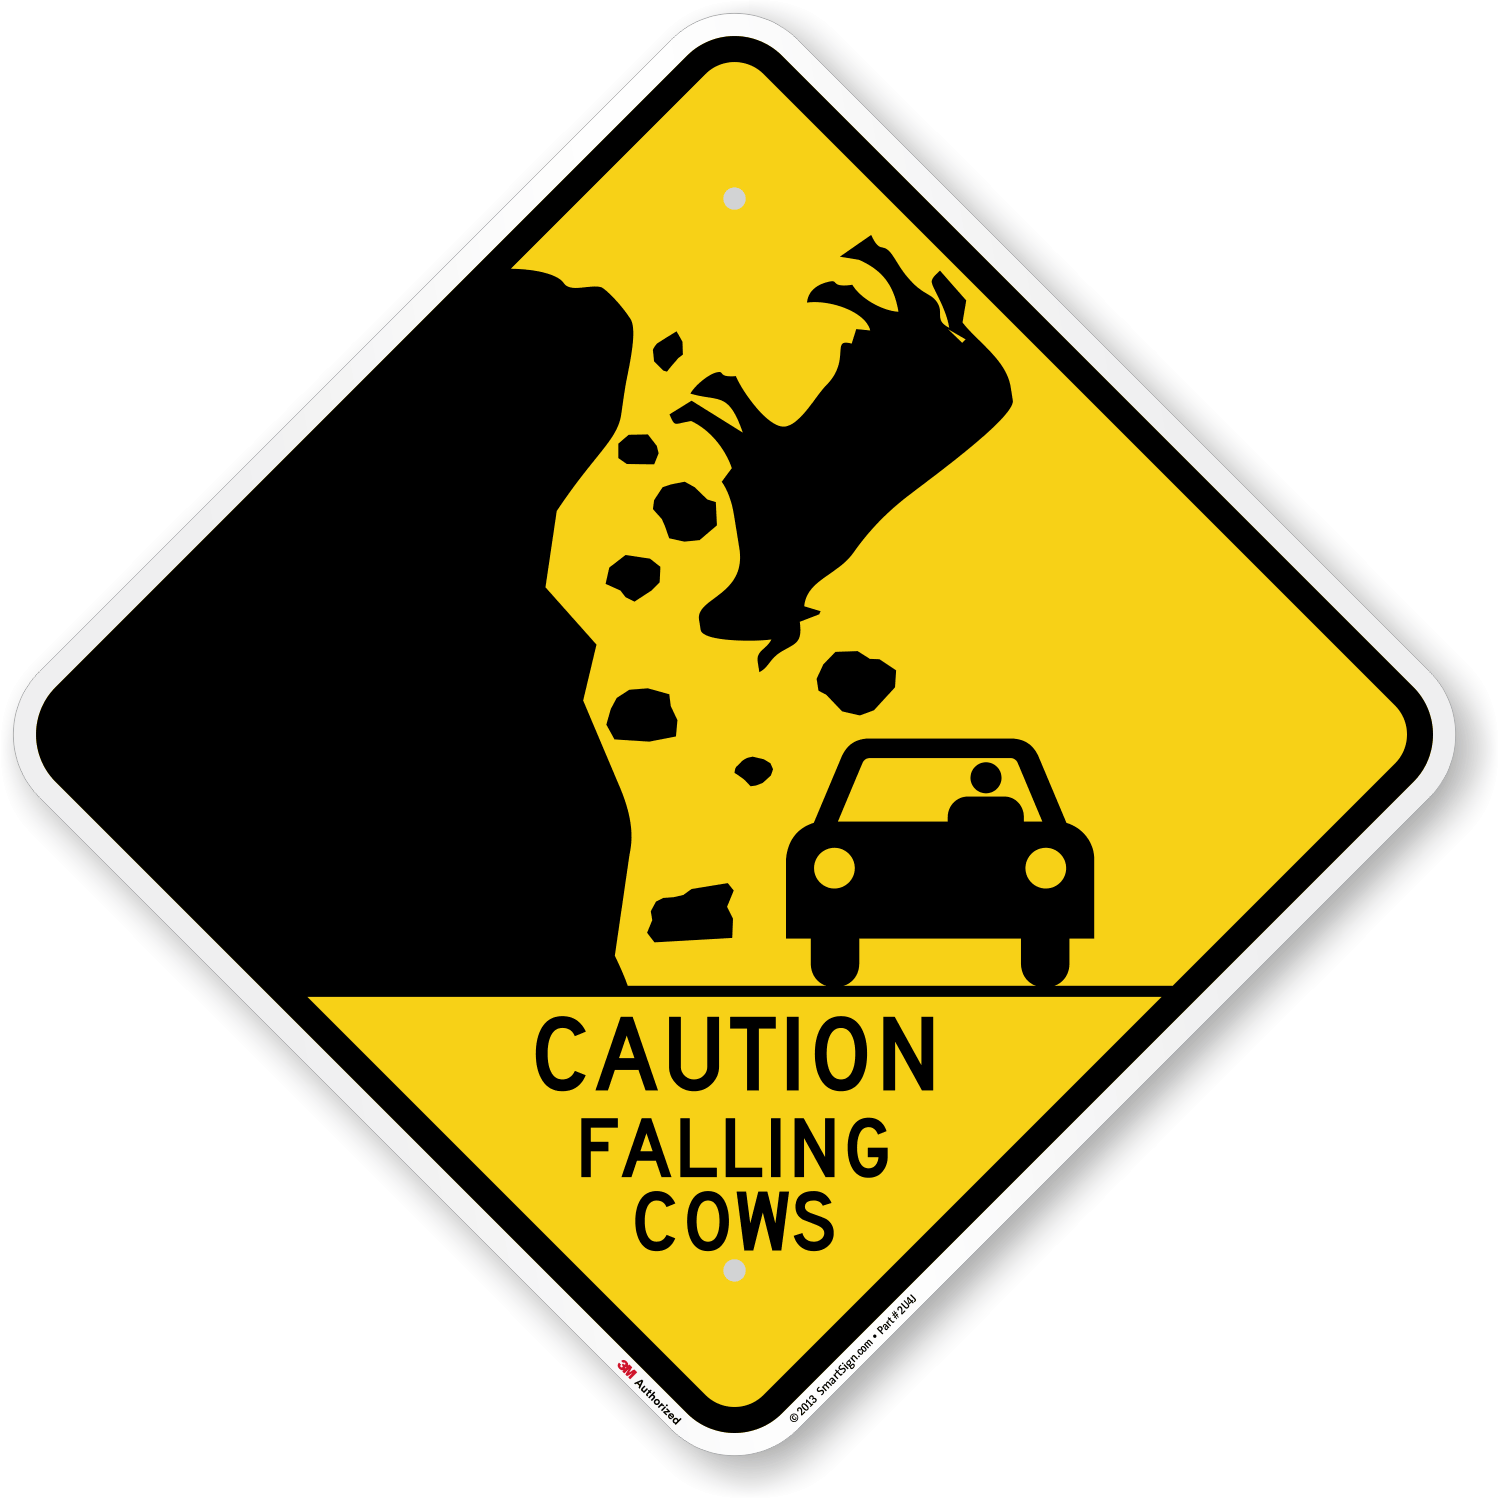 Caution Falling Cows Sign - Funny Road Sign, SKU: K-9916